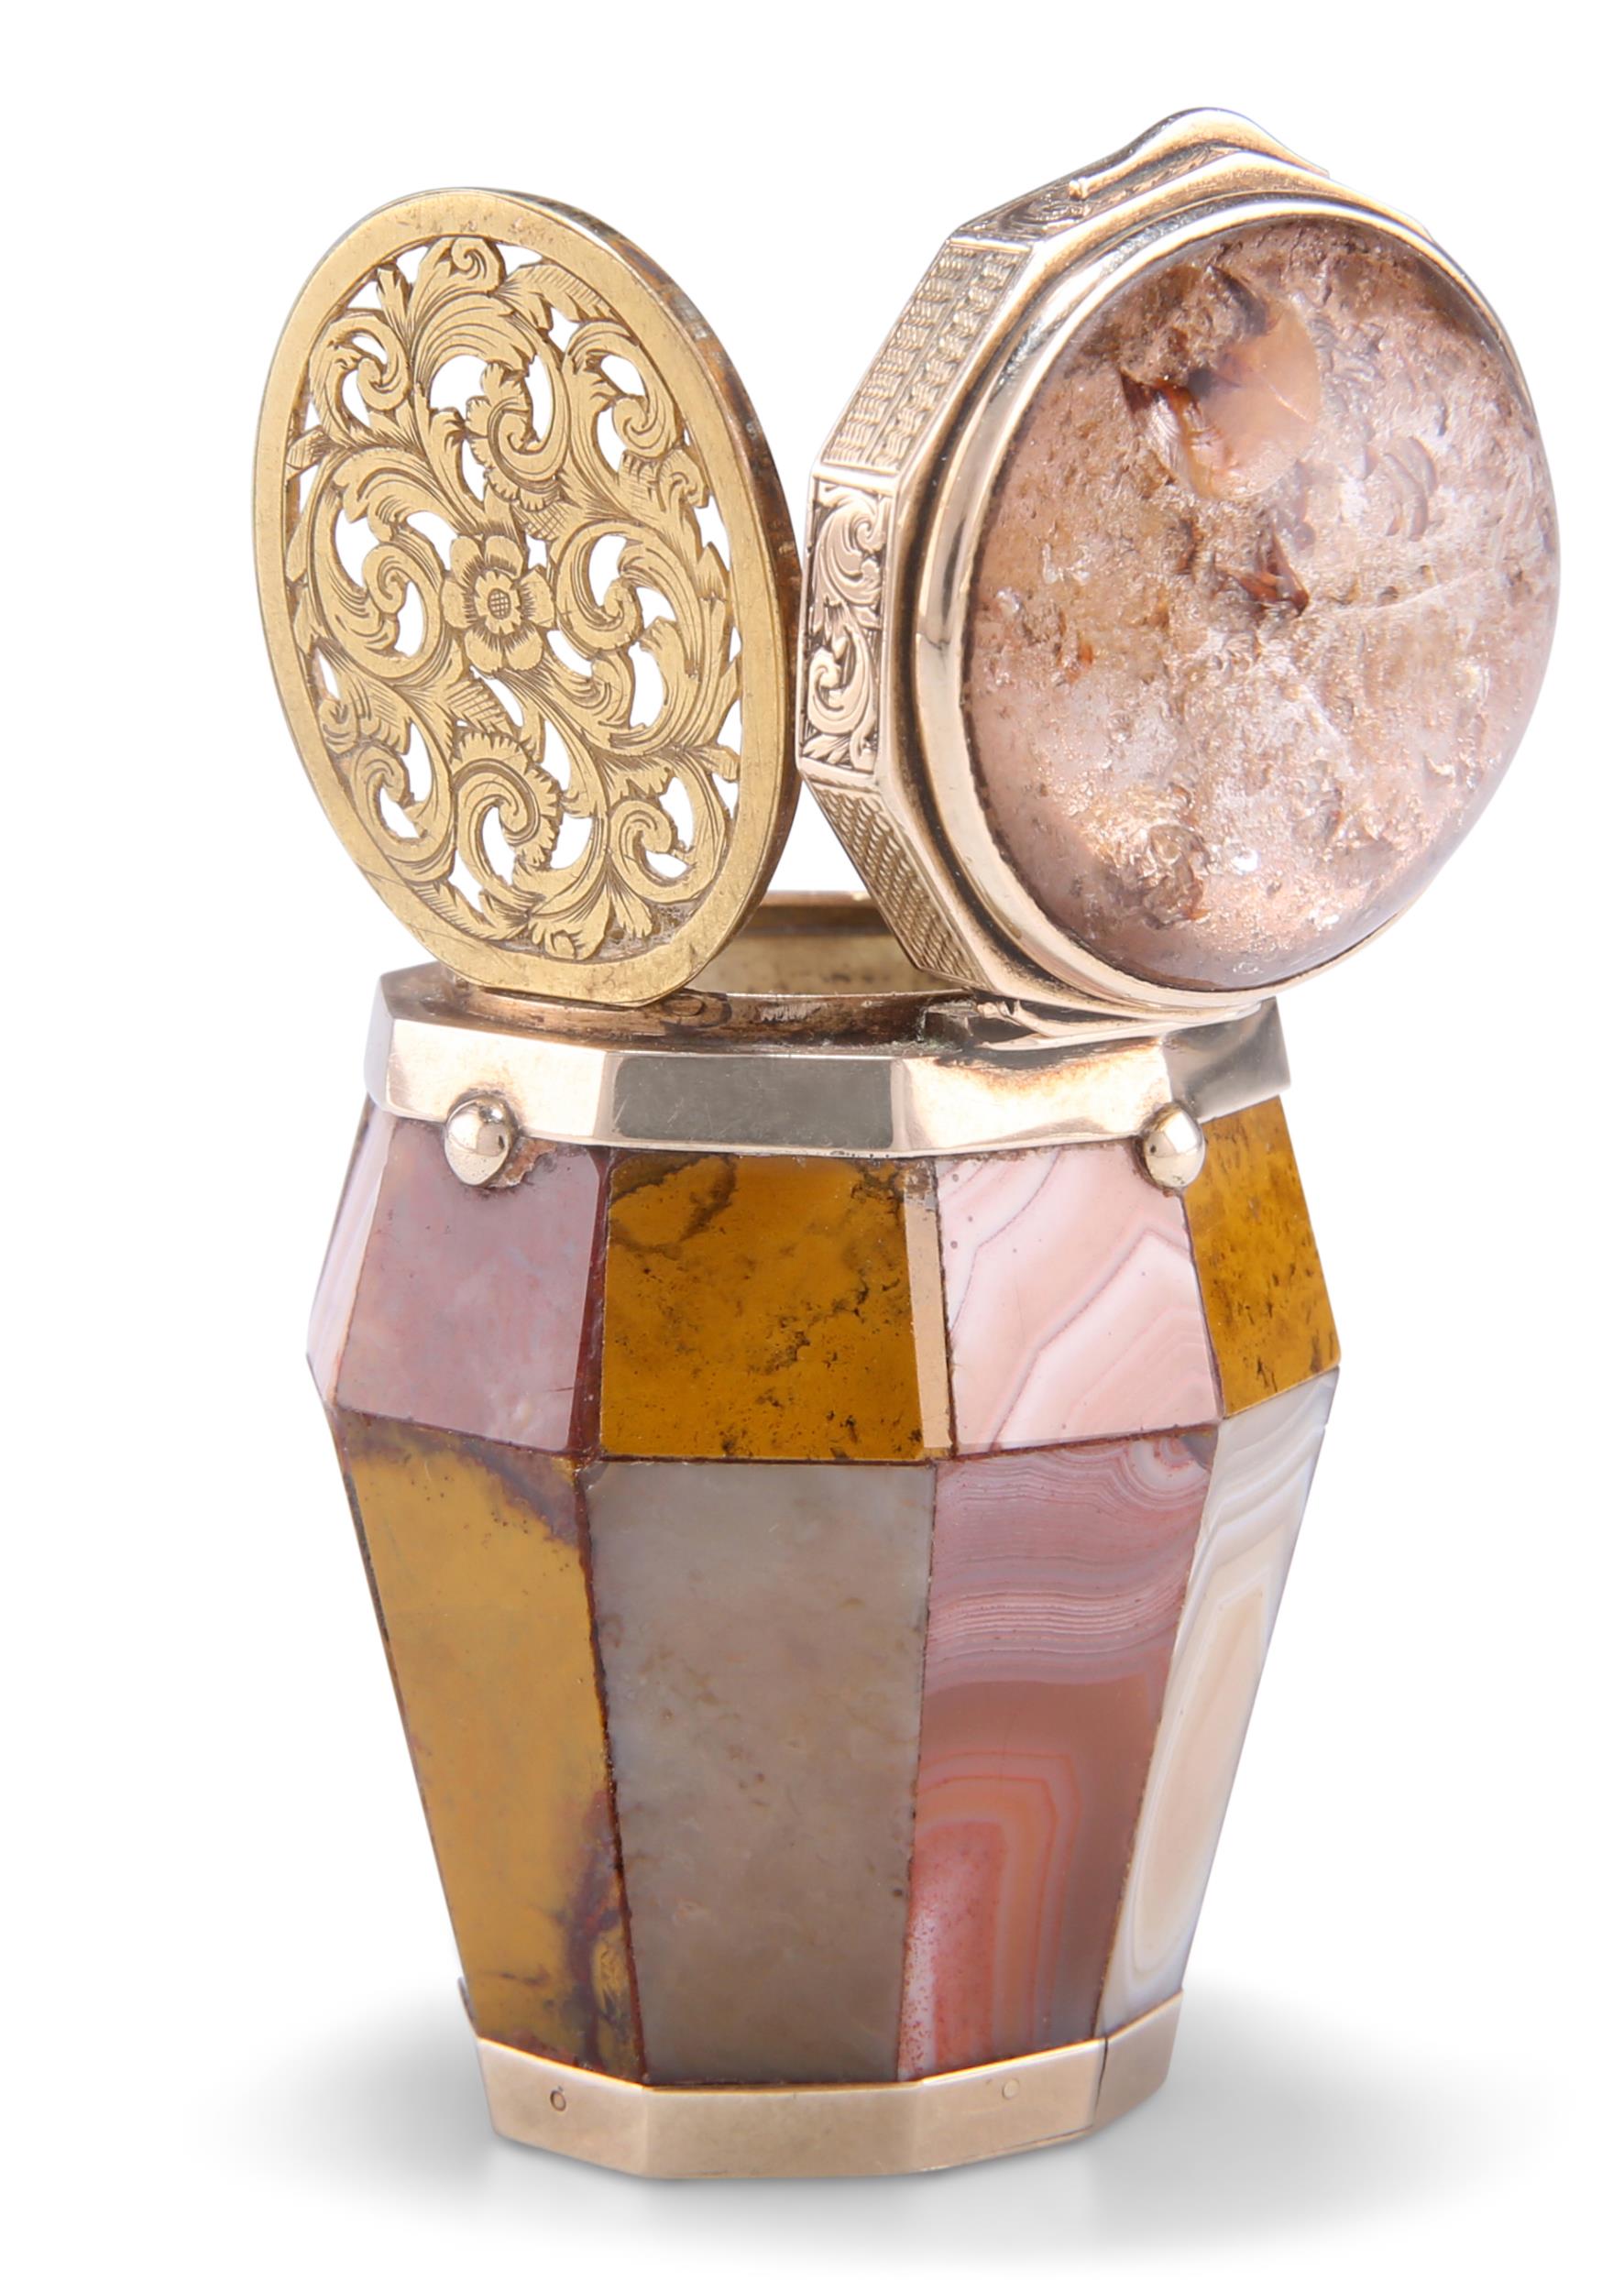 AN EARLY 19TH CENTURY SCOTTISH GOLD-MOUNTED AGATE VINAIGRETTE